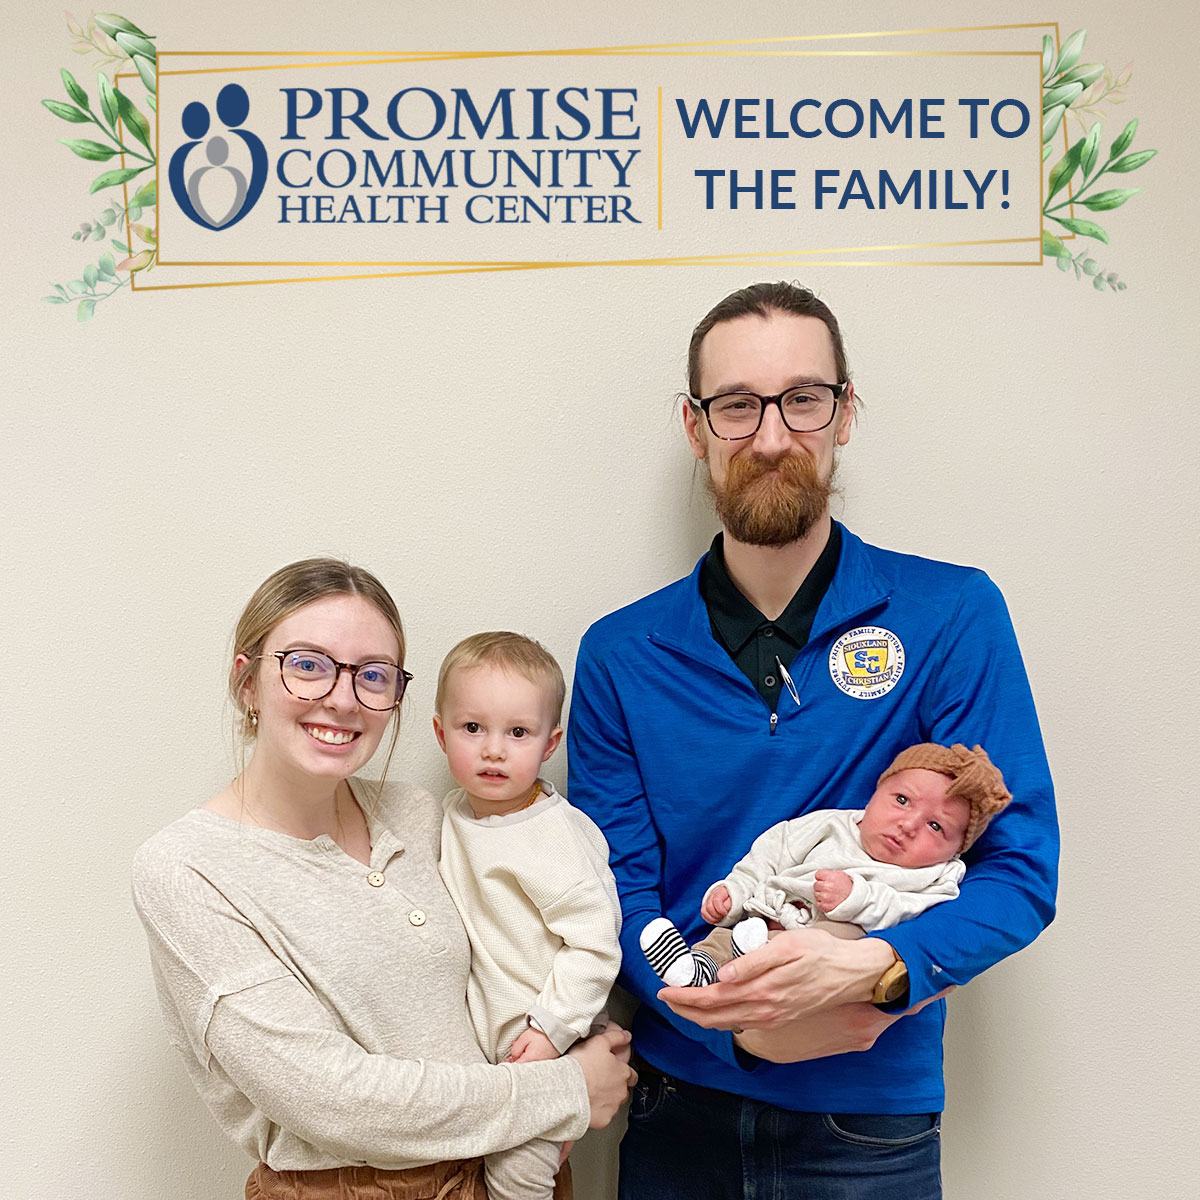 The Kamm family home birth in Sioux City, Iowa | Promise Community Health Center in Sioux Center, Iowa | Home births in northwest Iowa, Home births in southeast South Dakota, Home births in southwest Minnesota | Home births in Sioux Falls South Dakota, Home births in Beresford South Dakota, Home births in Sioux City IA, Home births in LeMars IA, Home births in Worthington MN, Home births in Iowa, Home births in South Dakota, Home births in Minnesota